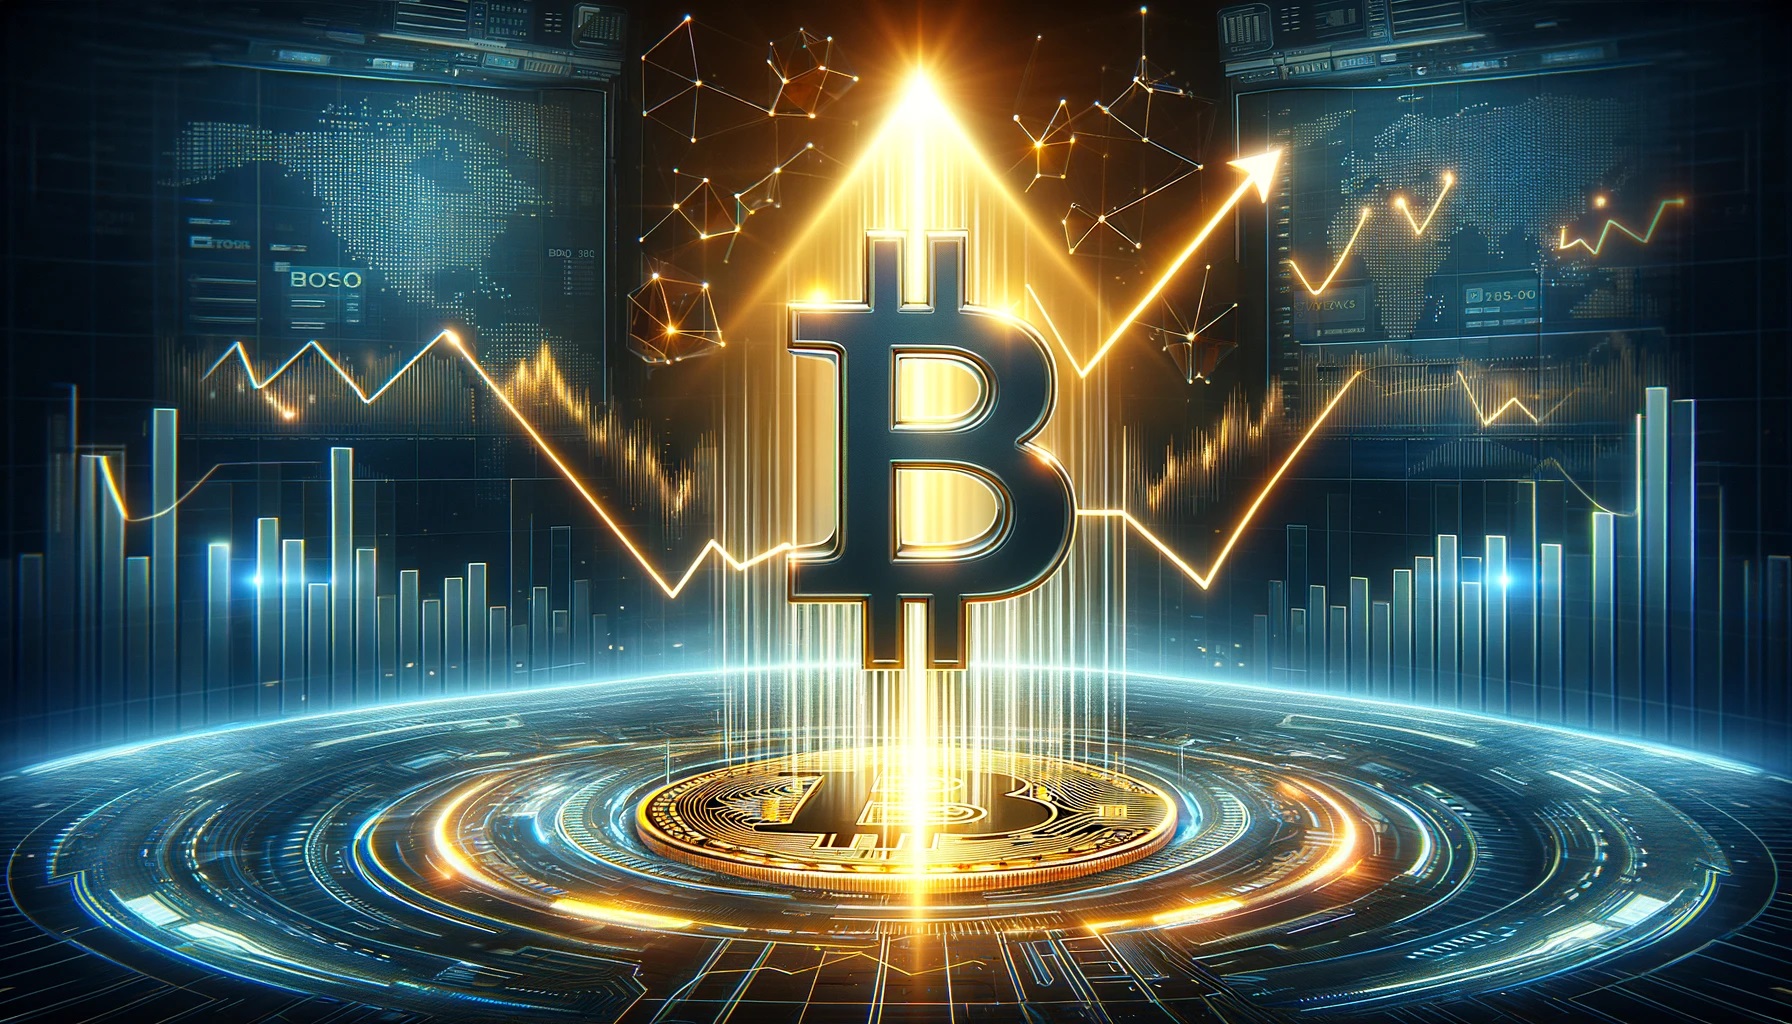 Bitcoin Approaching “Escape Velocity” That Will Take Prices Past $70,000: Analyst